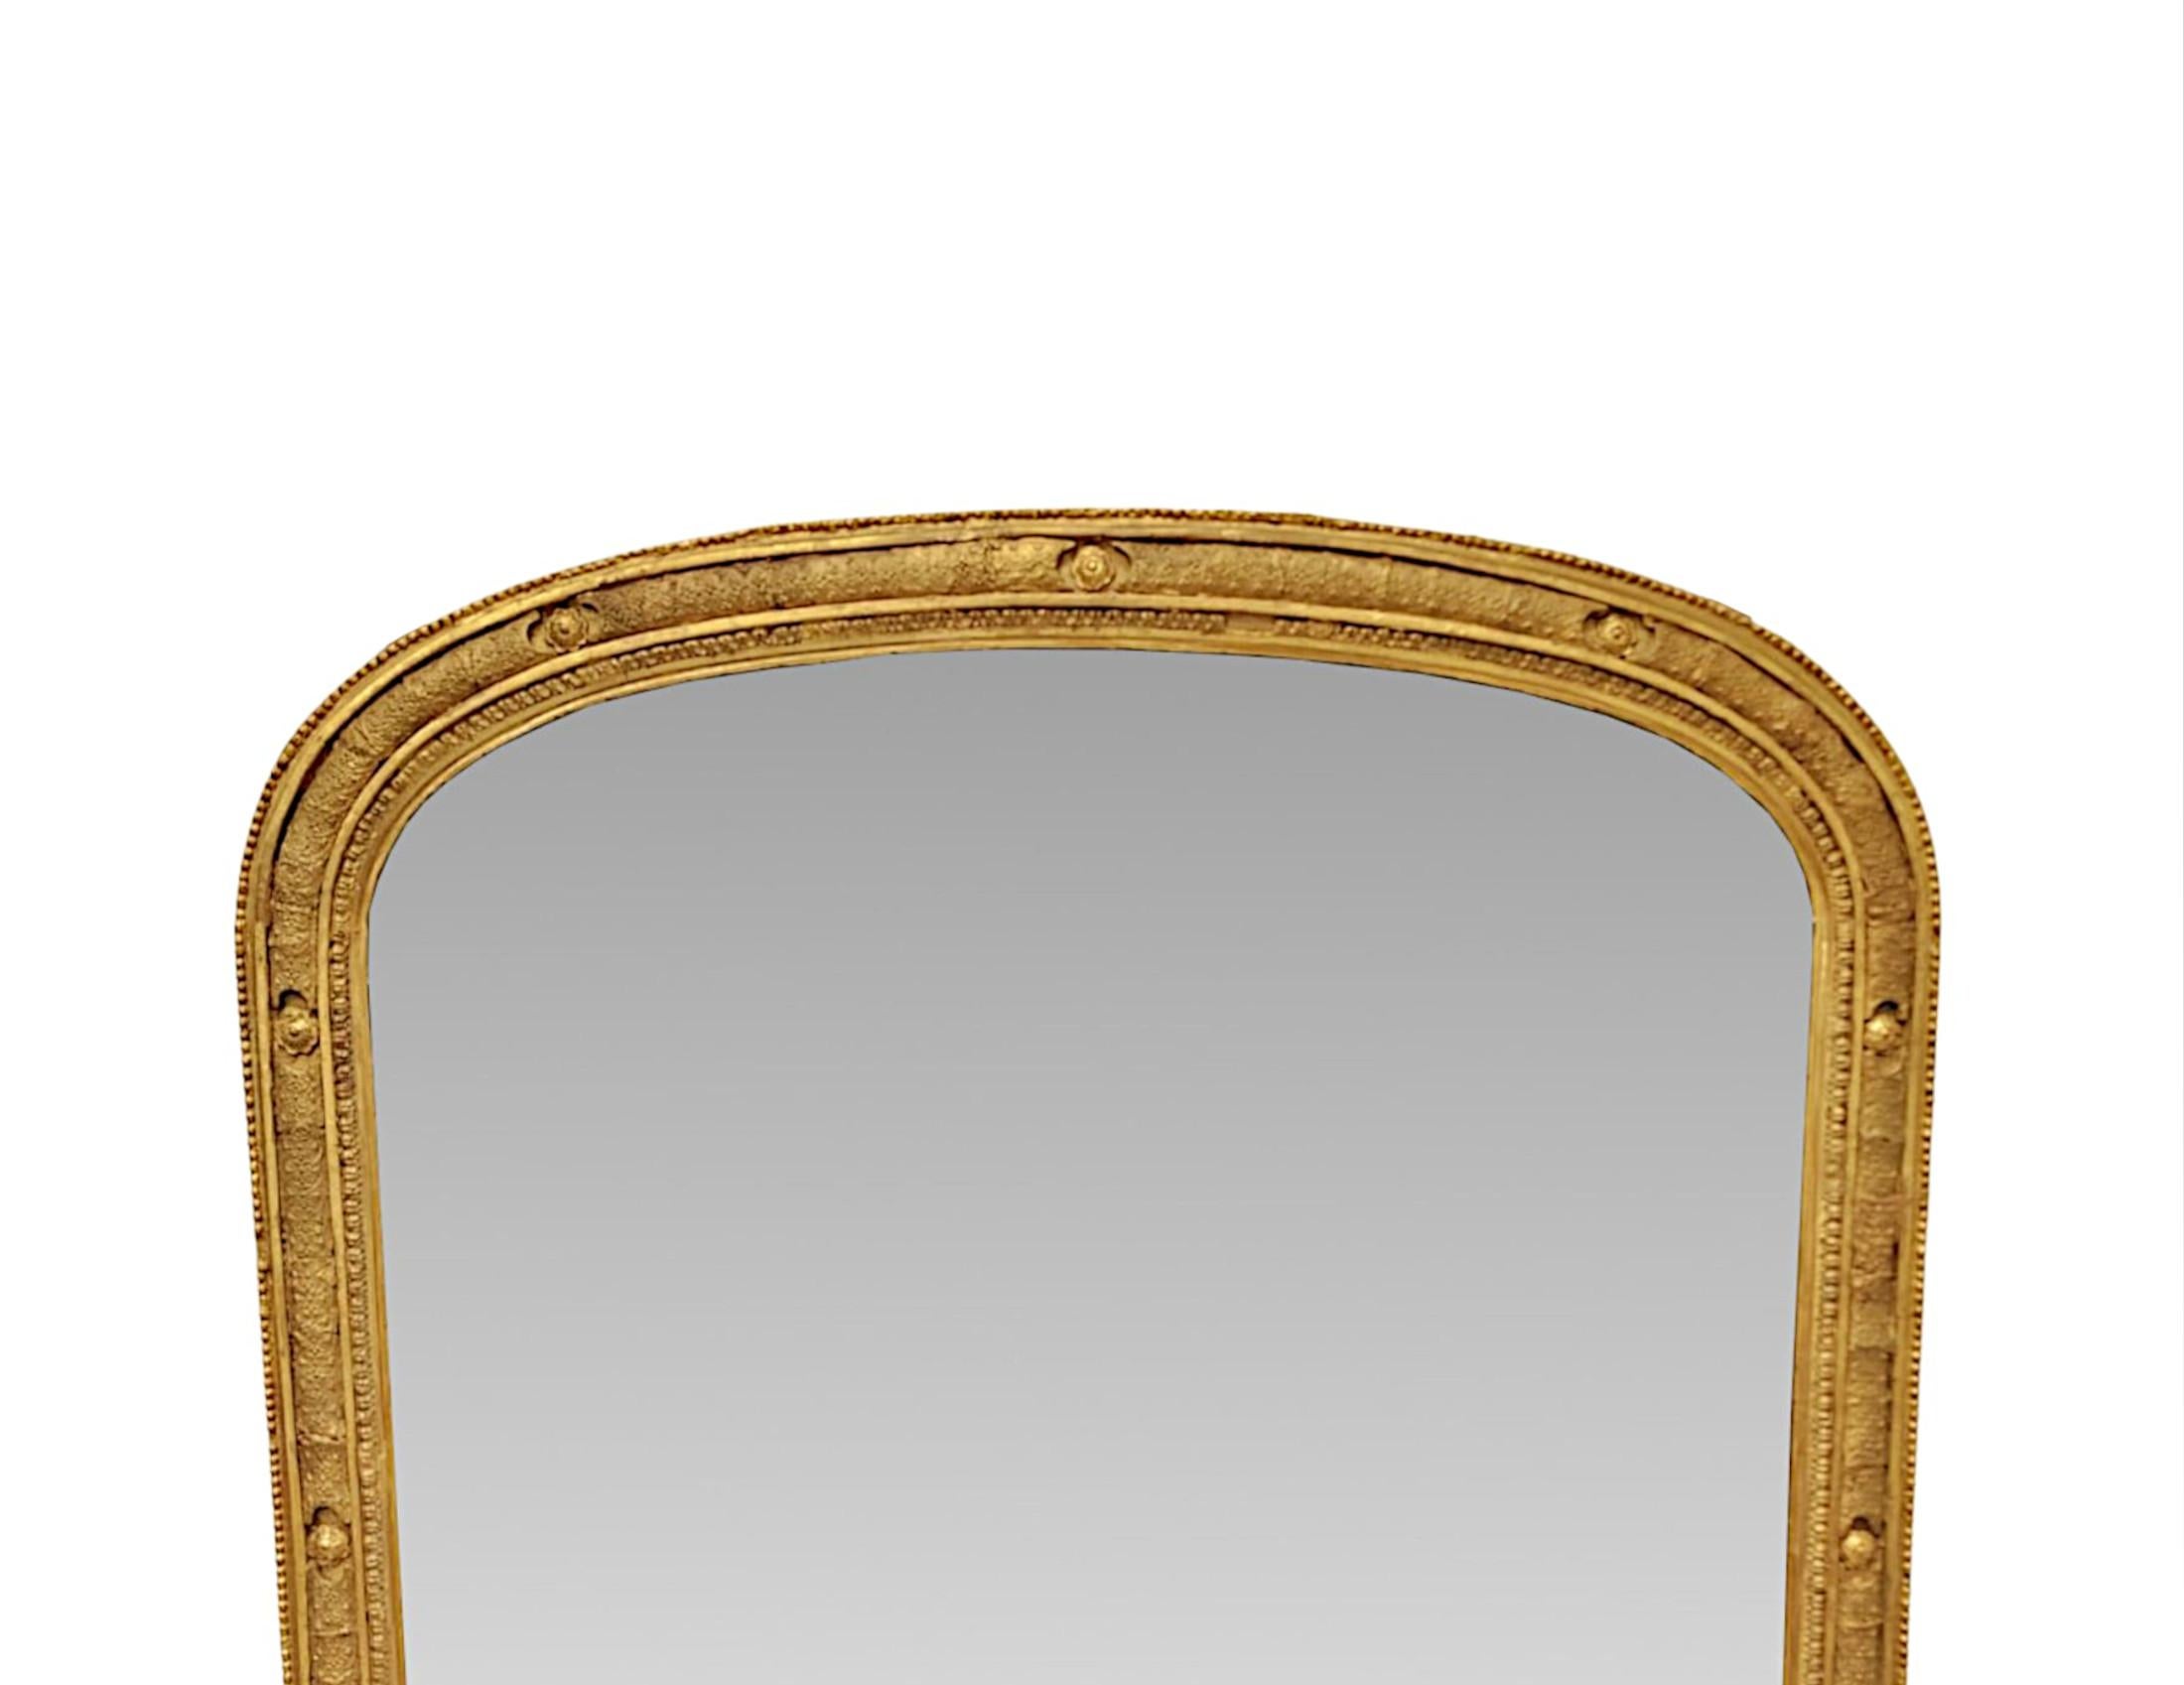 A very fine 19th Century elegantly simple, giltwood overmantel mirror of exceptional quality and neat proportions.  The shaped mirror glass plate of archtop form is set within a stunningly hand carved, moulded and fluted giltwood frame with fabulous